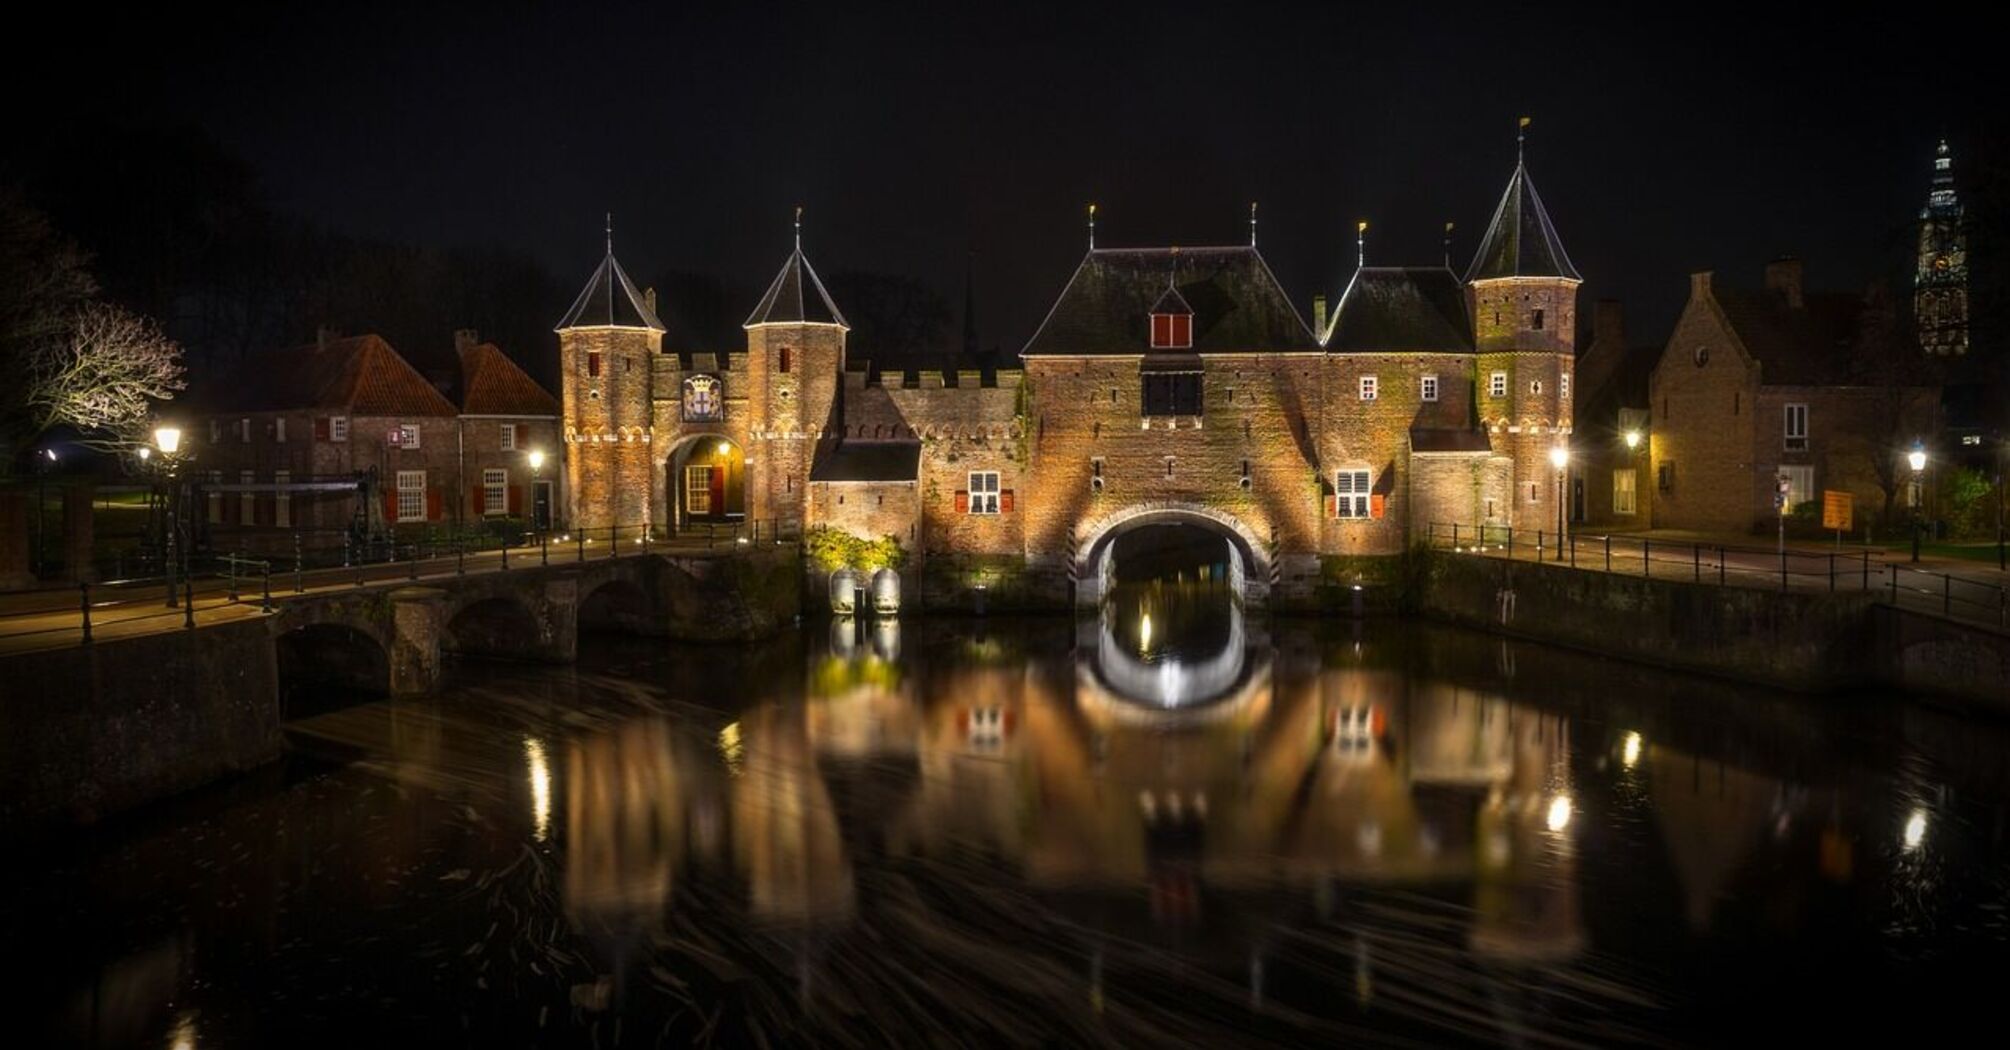 Amersfoort in the Netherlands was awarded the title of City of the Year. Photos of a picturesque European corner